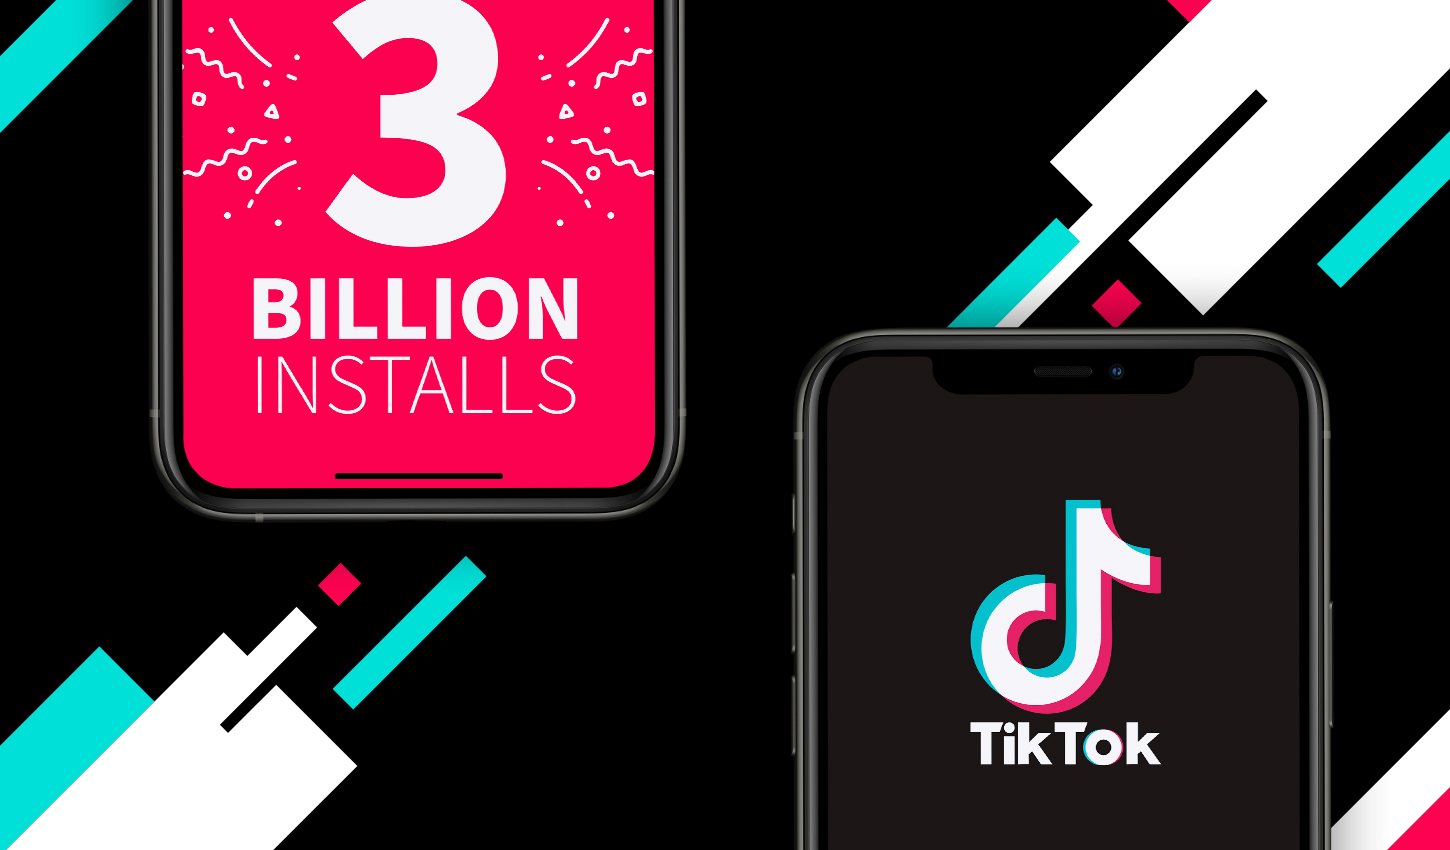 how to download game life 2 apk｜TikTok Search